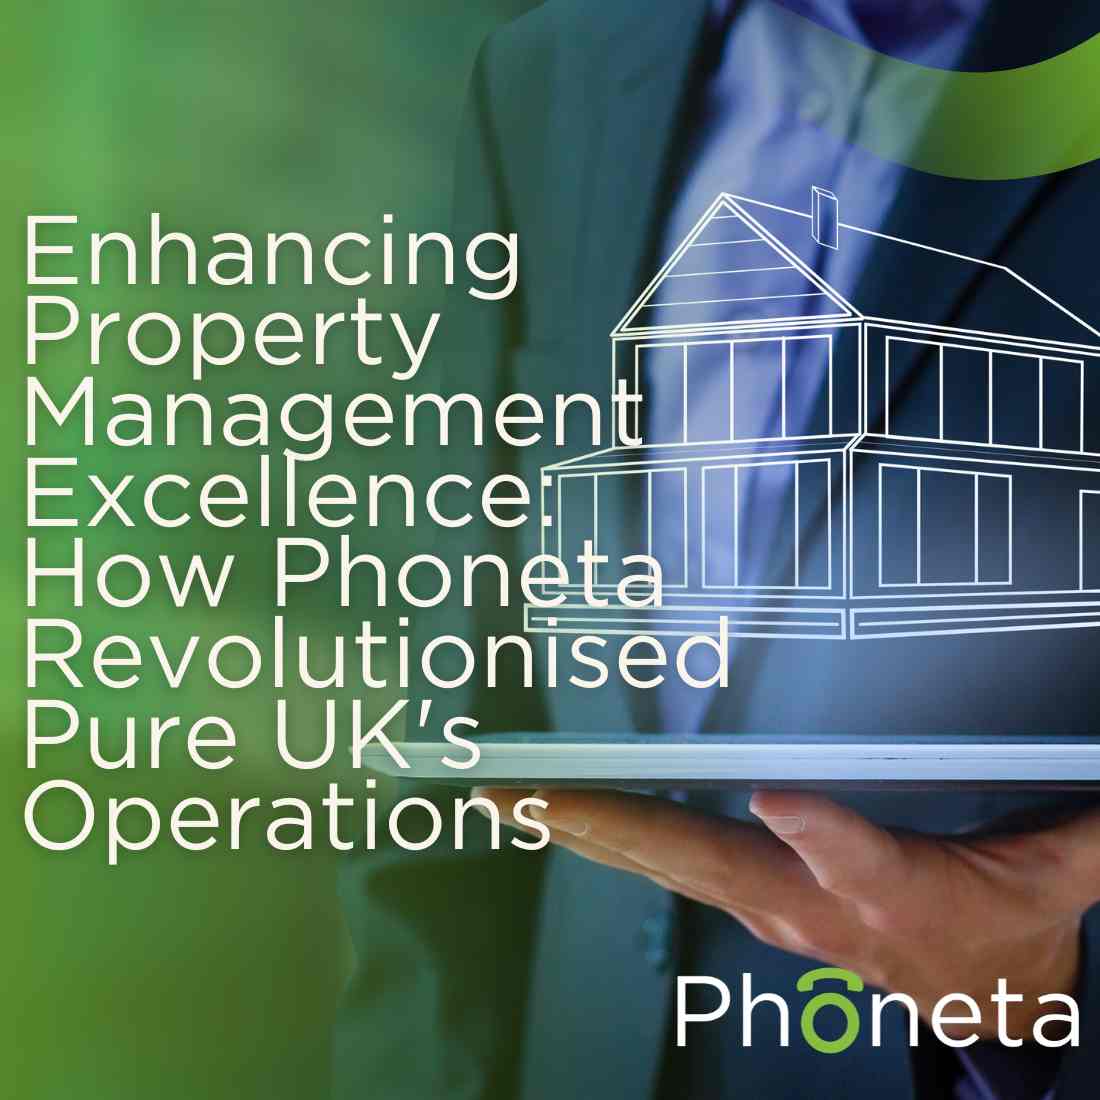 Enhancing Property Management Excellence: How Phoneta Revolutionised Pure UK's Operations